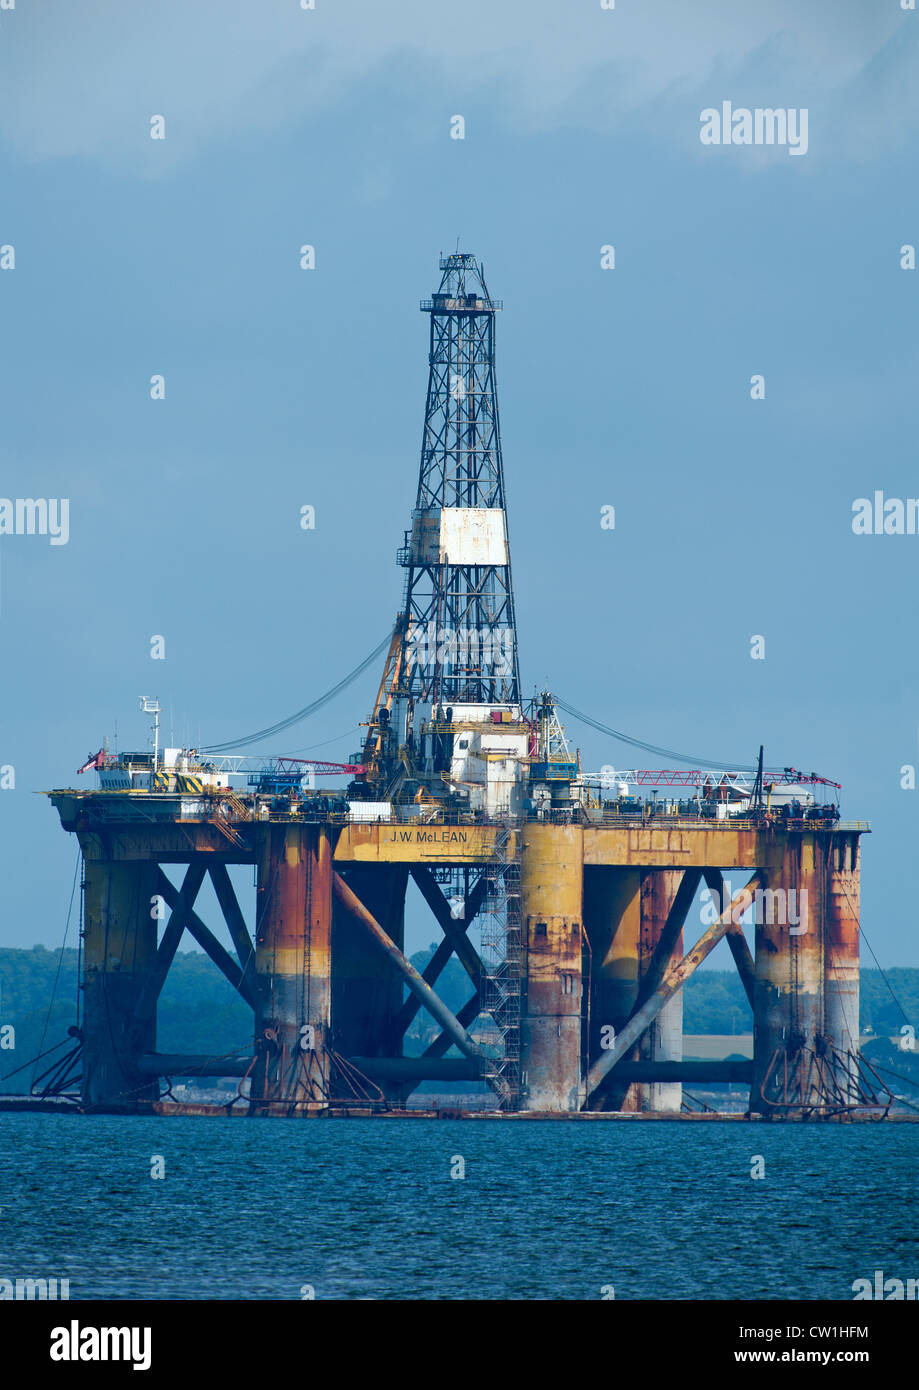 Oil Rig JW McLean, operated by Transocean, being serviced in the Cromarty Firth.    SCO 8282 Stock Photo